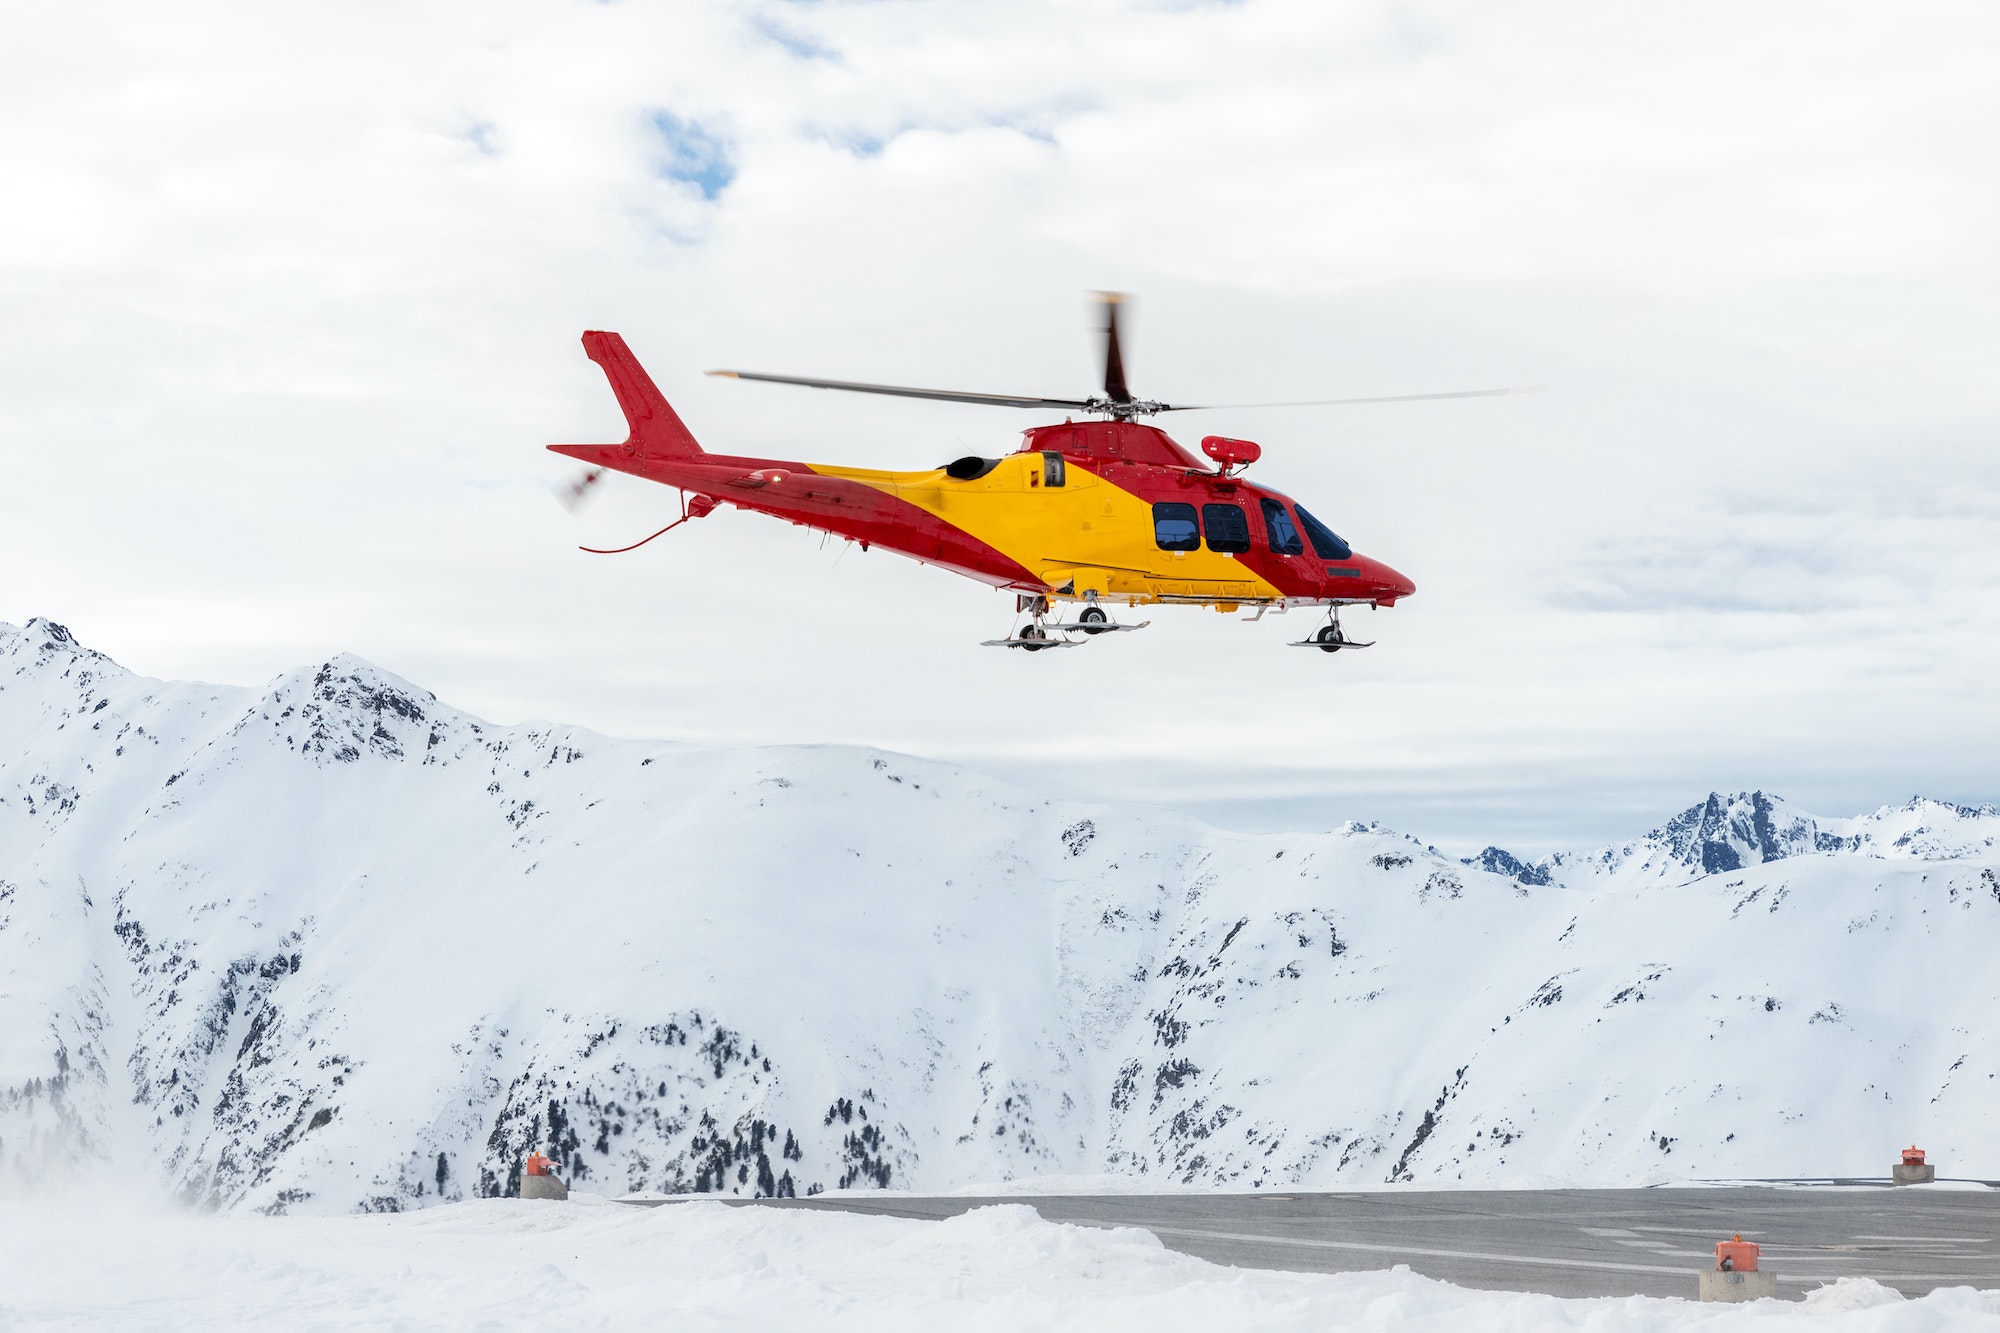 Mountain ski life rescue medic helicopter taking-off from station helipad to search injured skiers